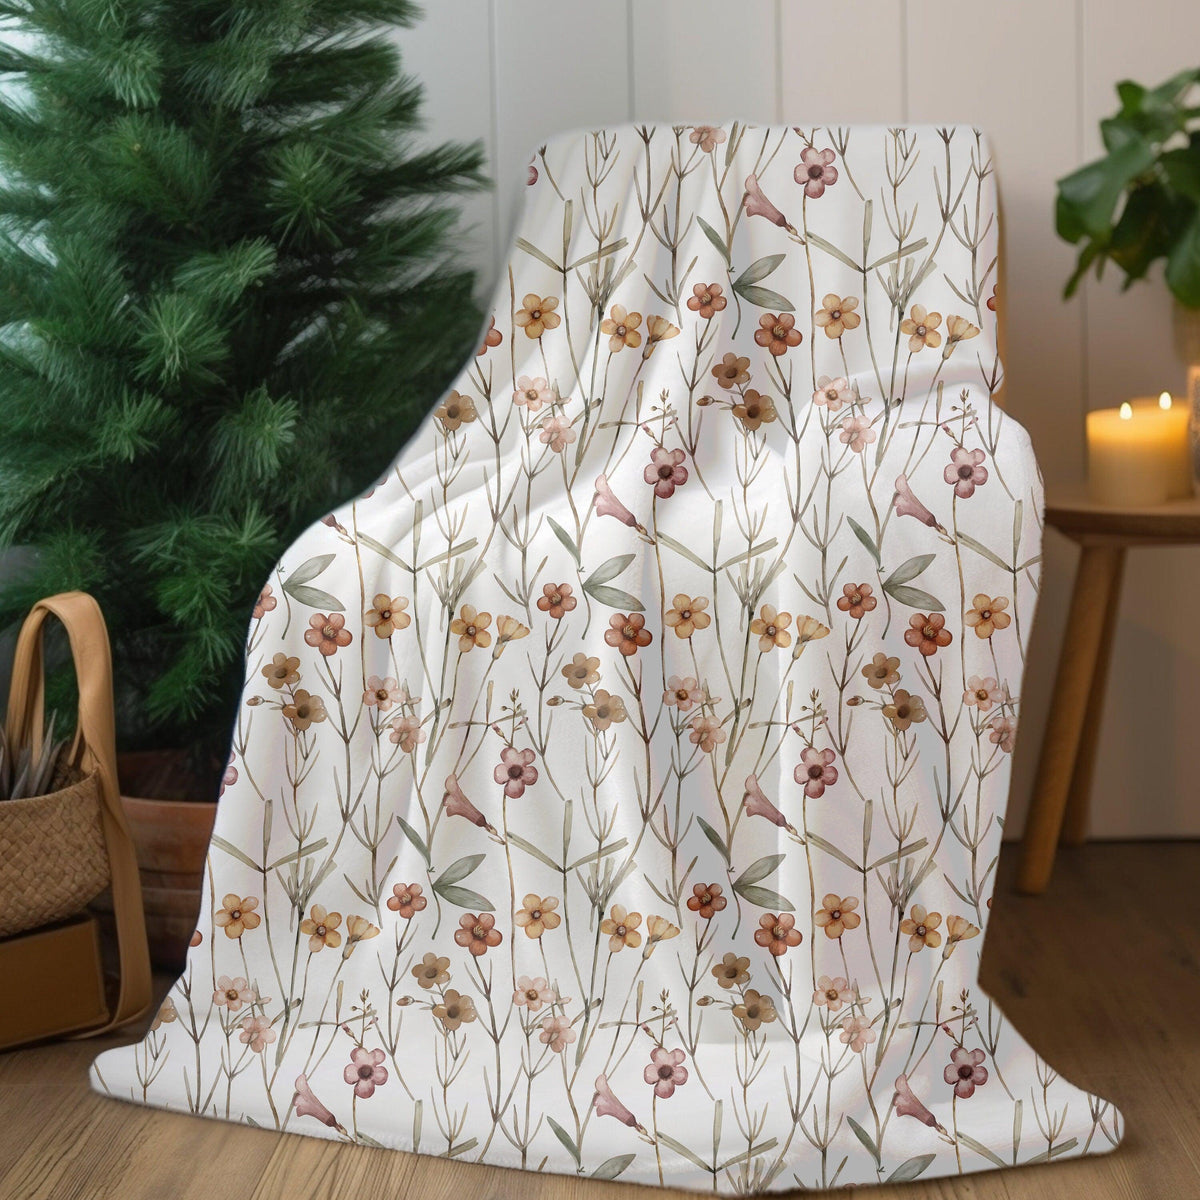 Cottage Core Gifts Wildflower Blanket Decor Vintage Cottagecore Throw Blanket Floral Plush Wildflower Blanket Fairycore Decor Gift for Her - The Ripple Effect Co.US